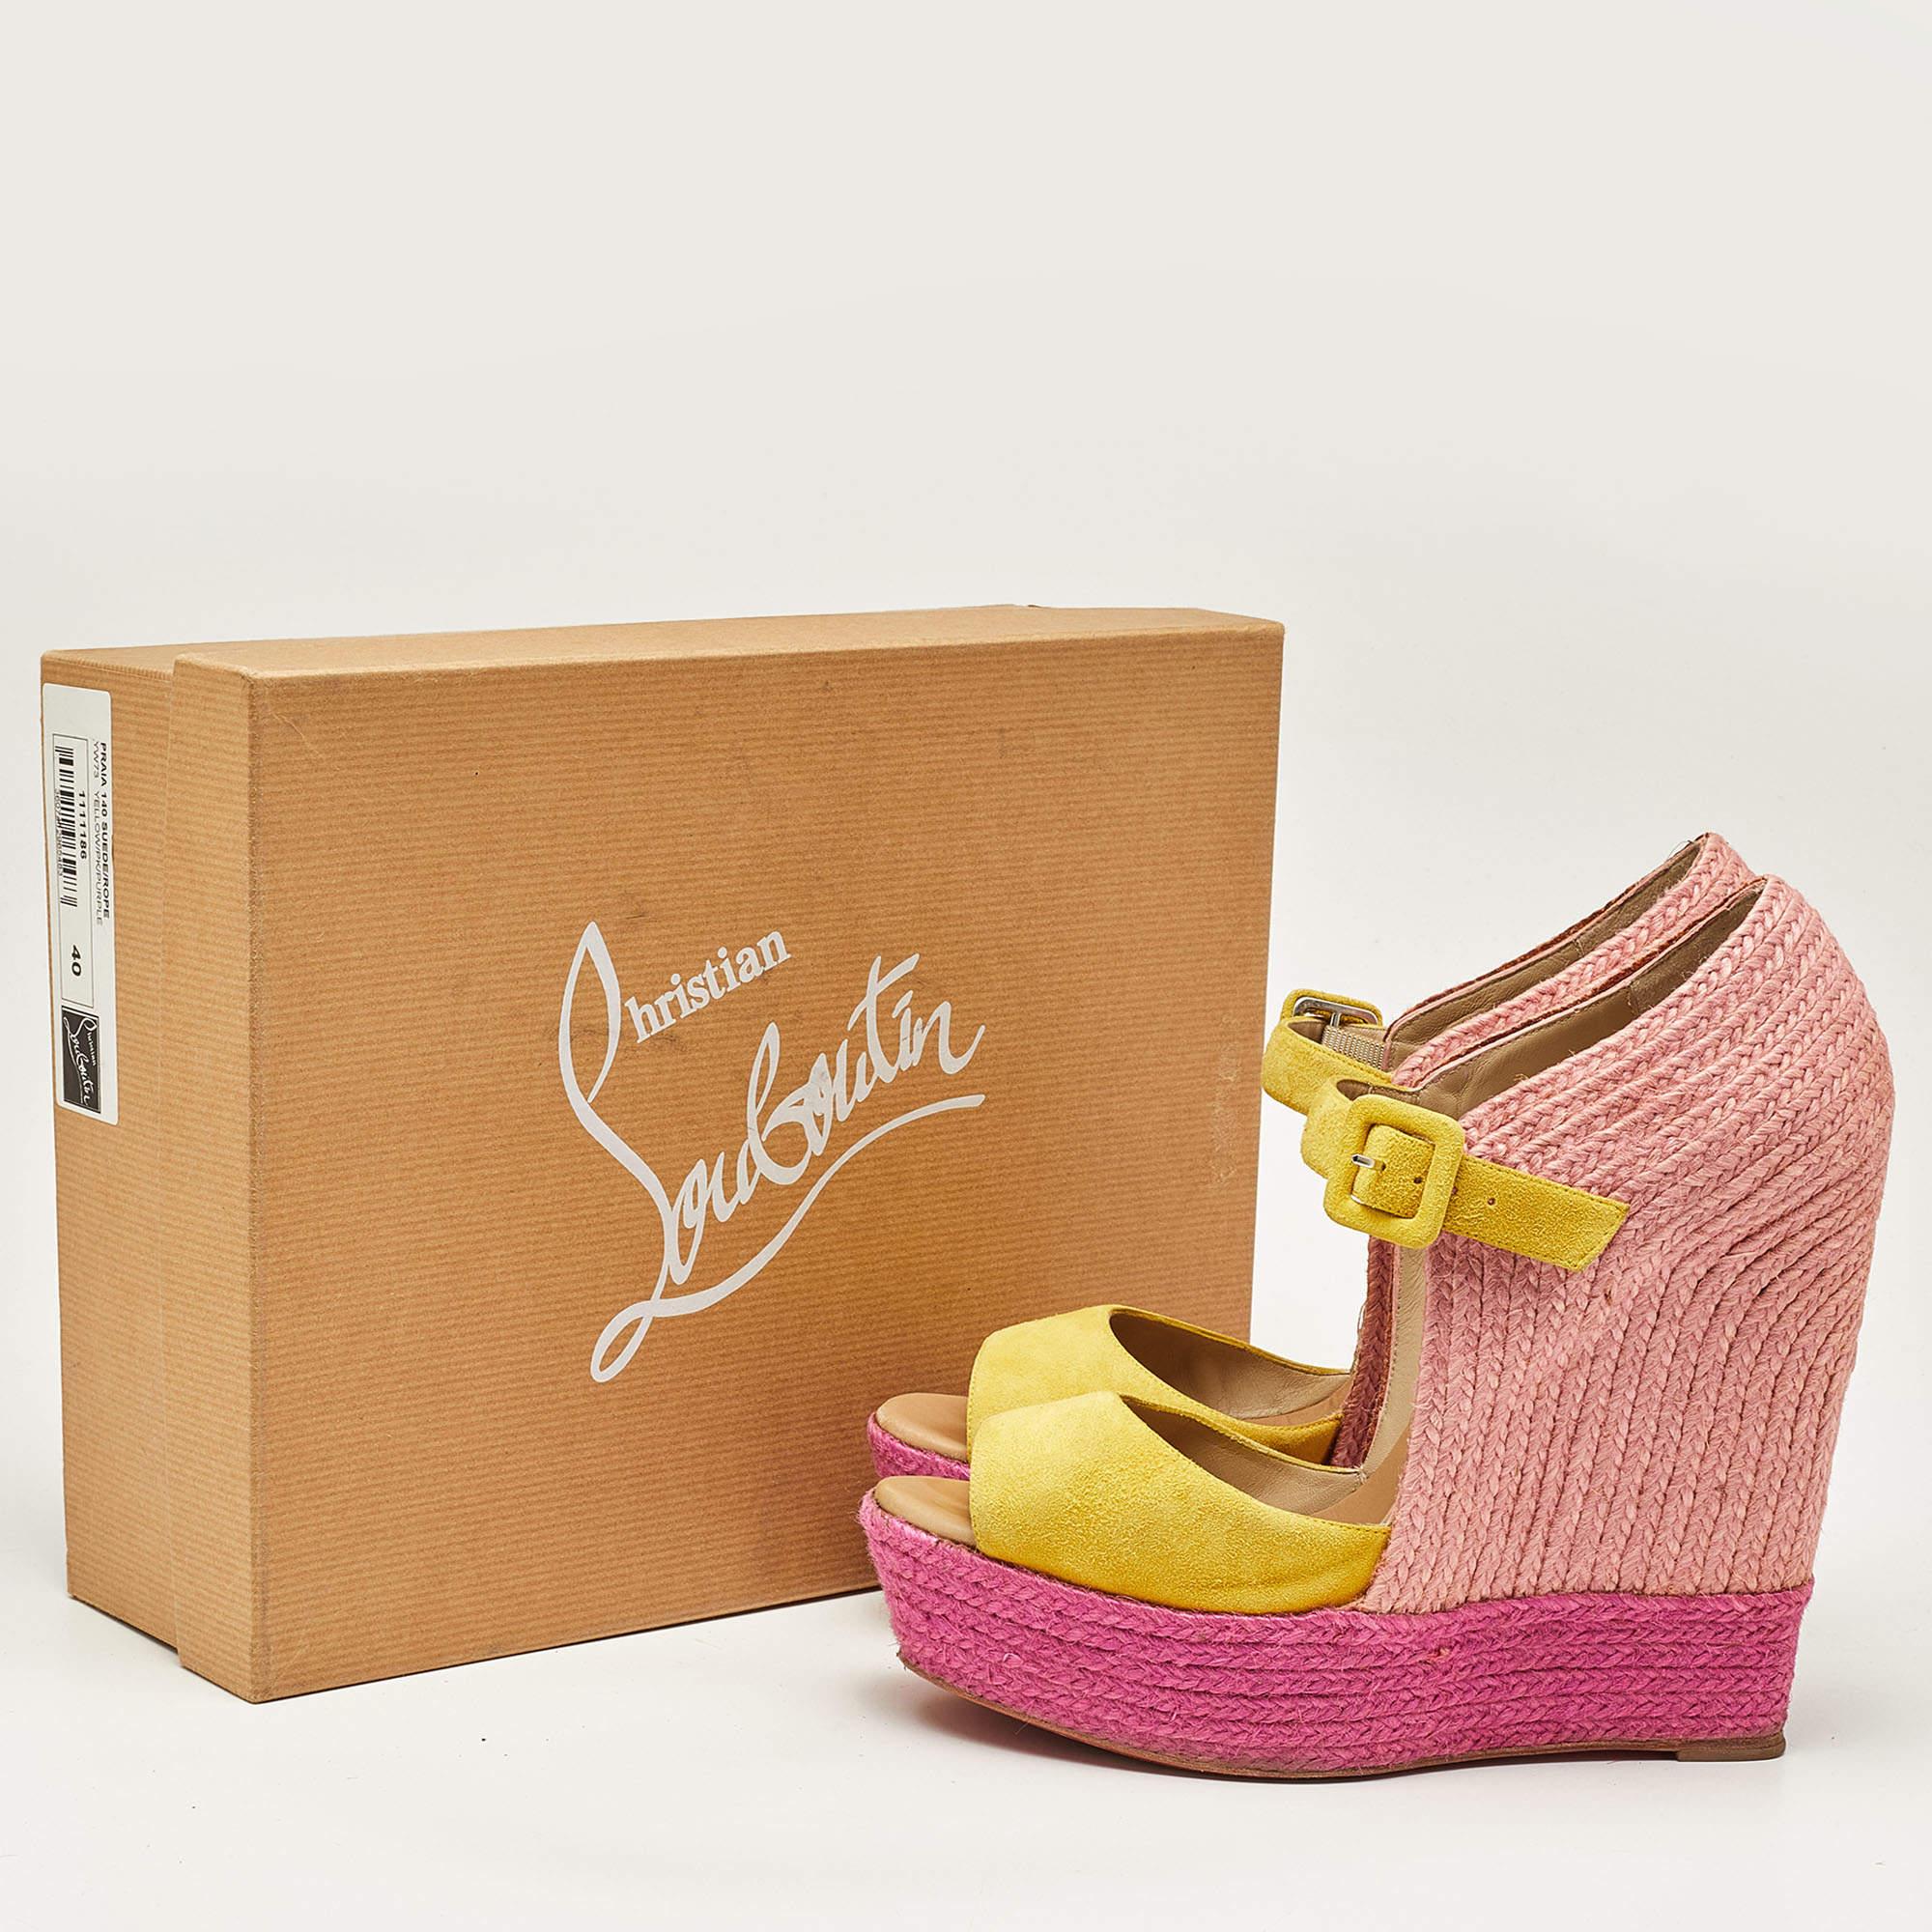 Christian Louboutin Yellow/Pink Suede Praia Wedge Sandals Size 40 5